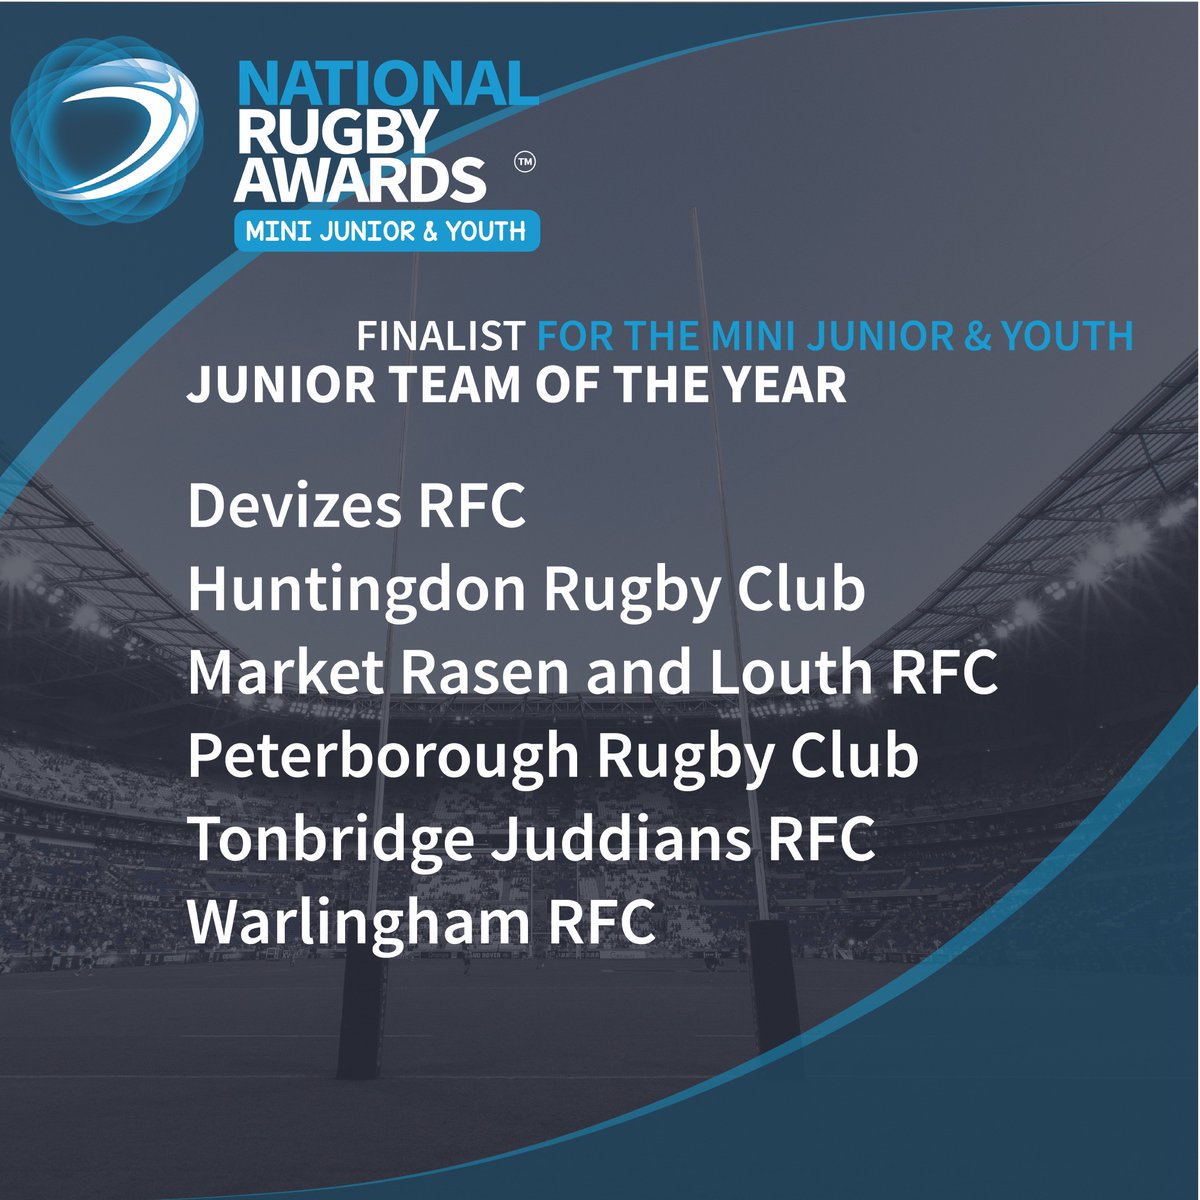 🏉 Junior Team of the Year 🏆 FINALISTS are… @DevizesRFC @huntingdonrugby @RasenLouthRugby @PRUFC @TJRFC @MightyWarl #Rugby #RugbyNews #EnglandRugby #NationalRugbyAwards